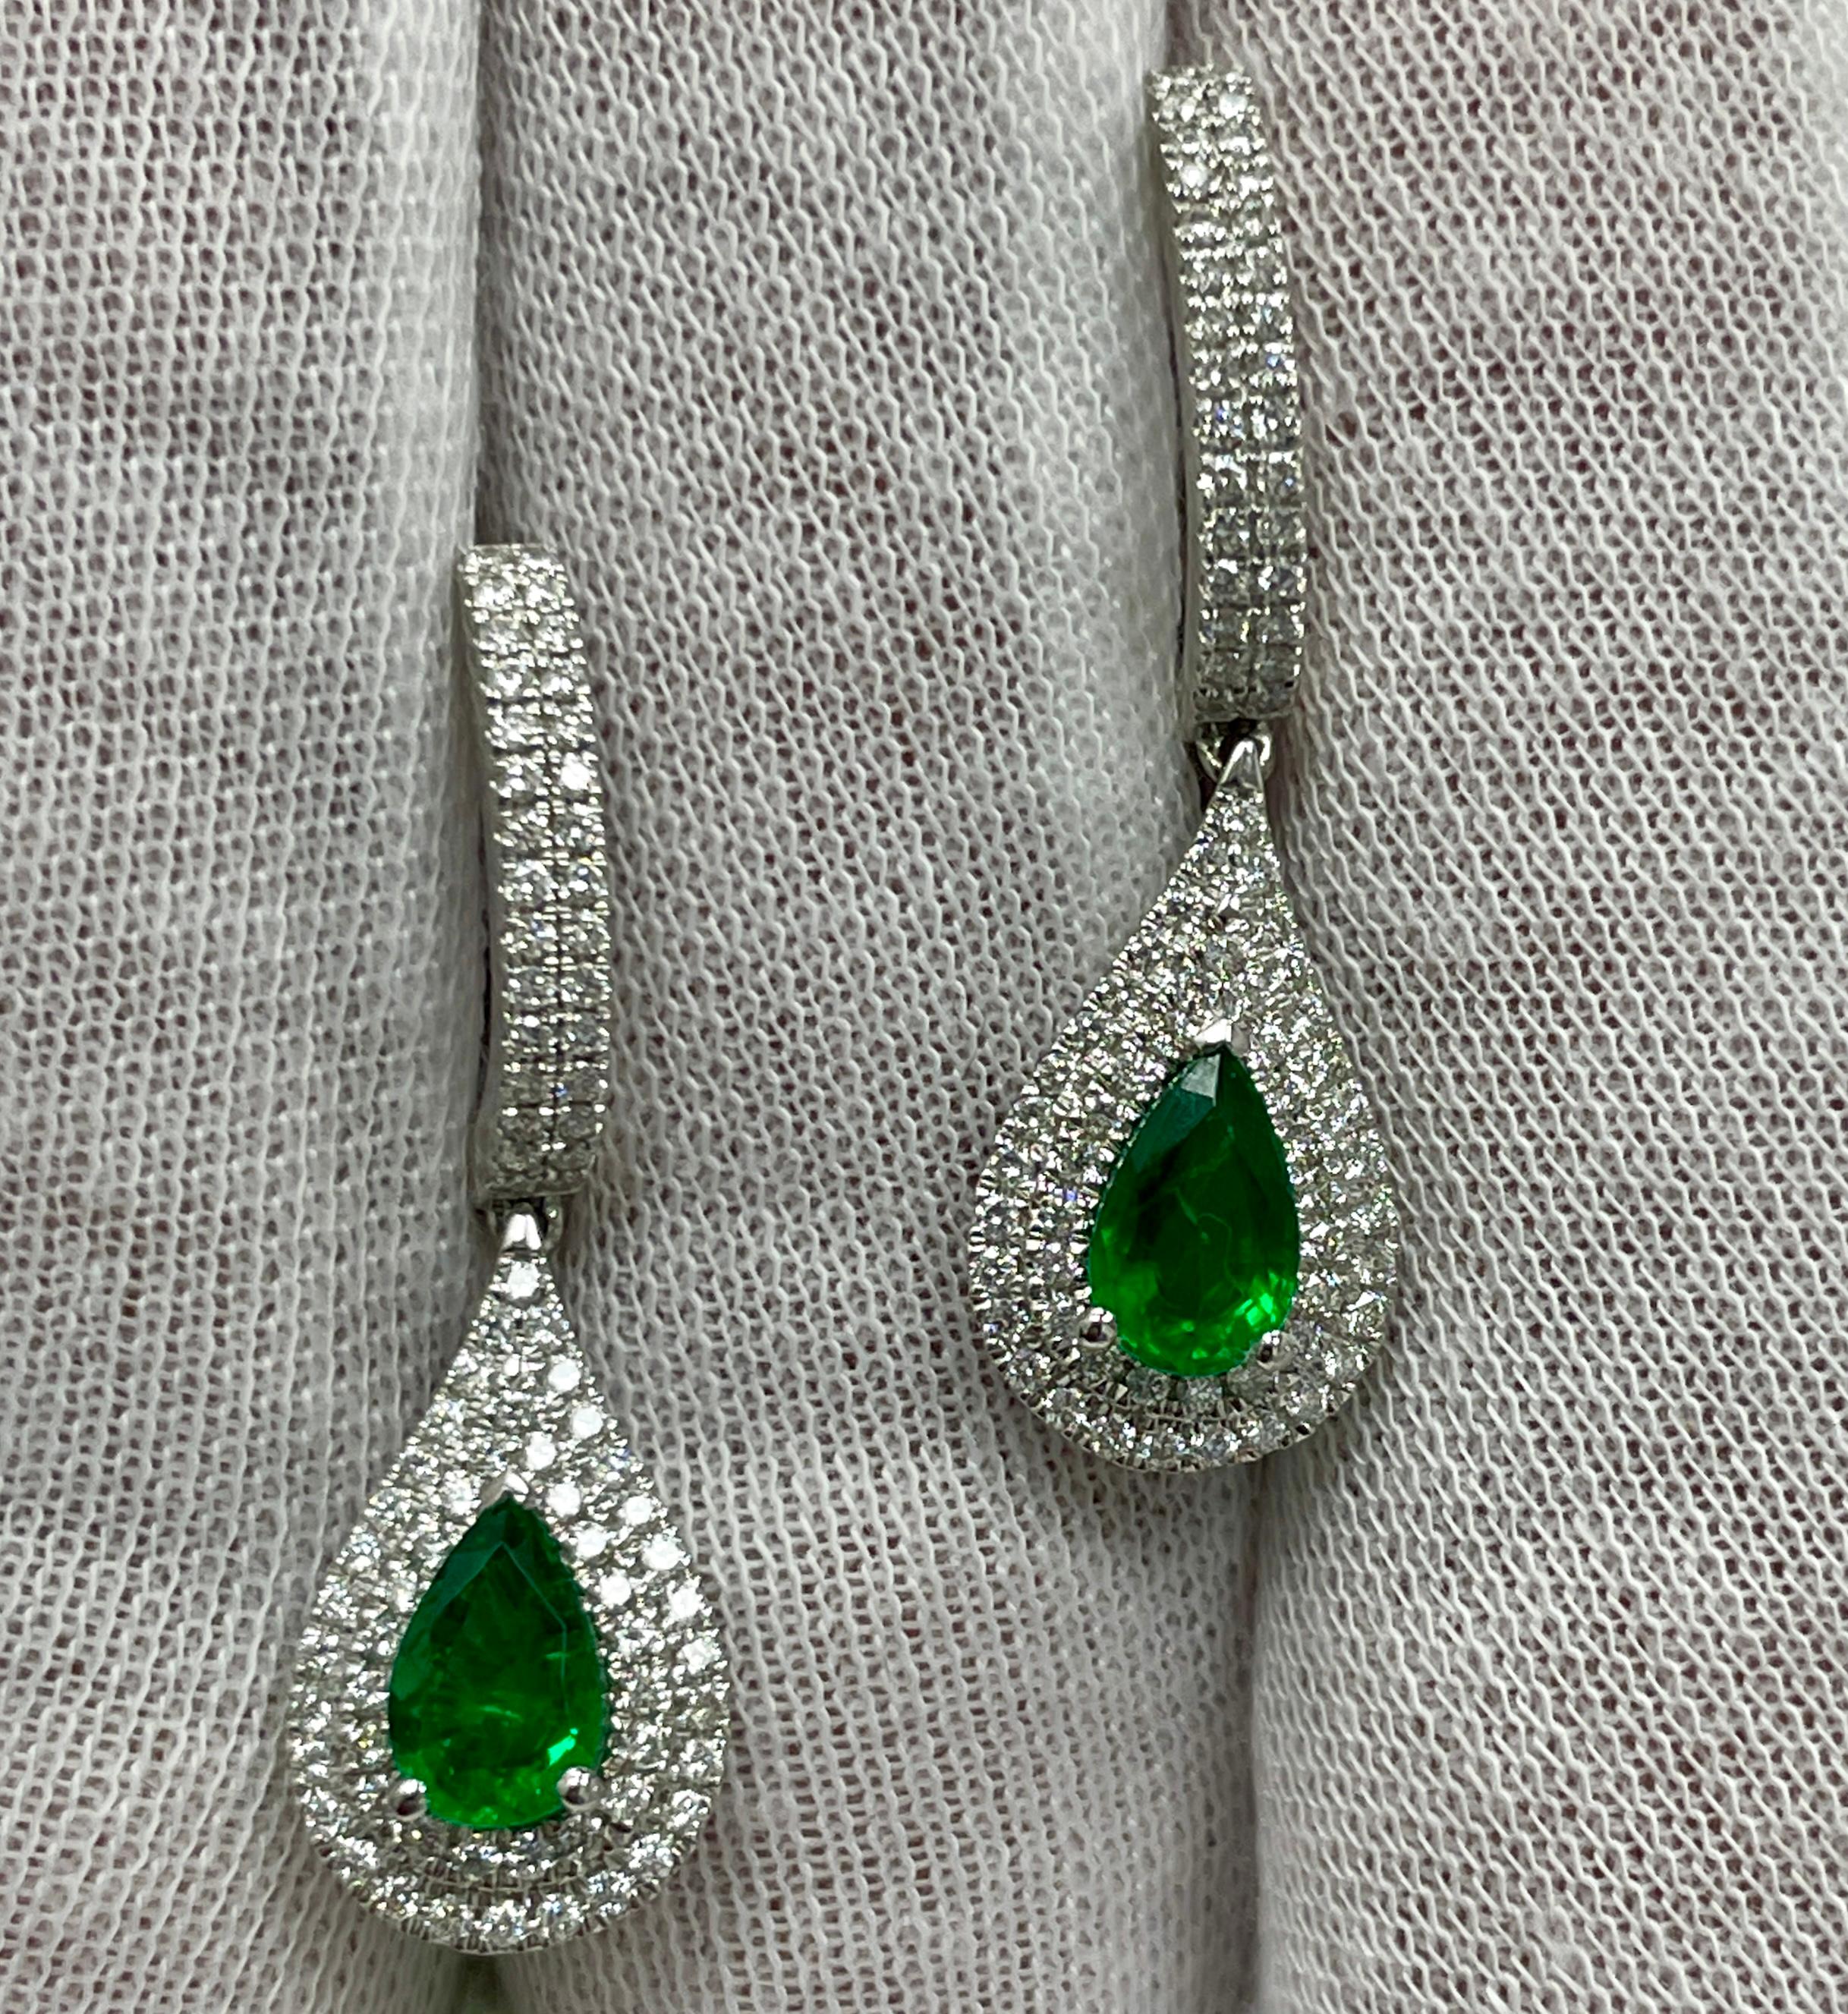 These dangling 18K white gold earrings carry .73Ct of brilliant white diamonds and 1.29Ct of stunning matching pear shape emeralds